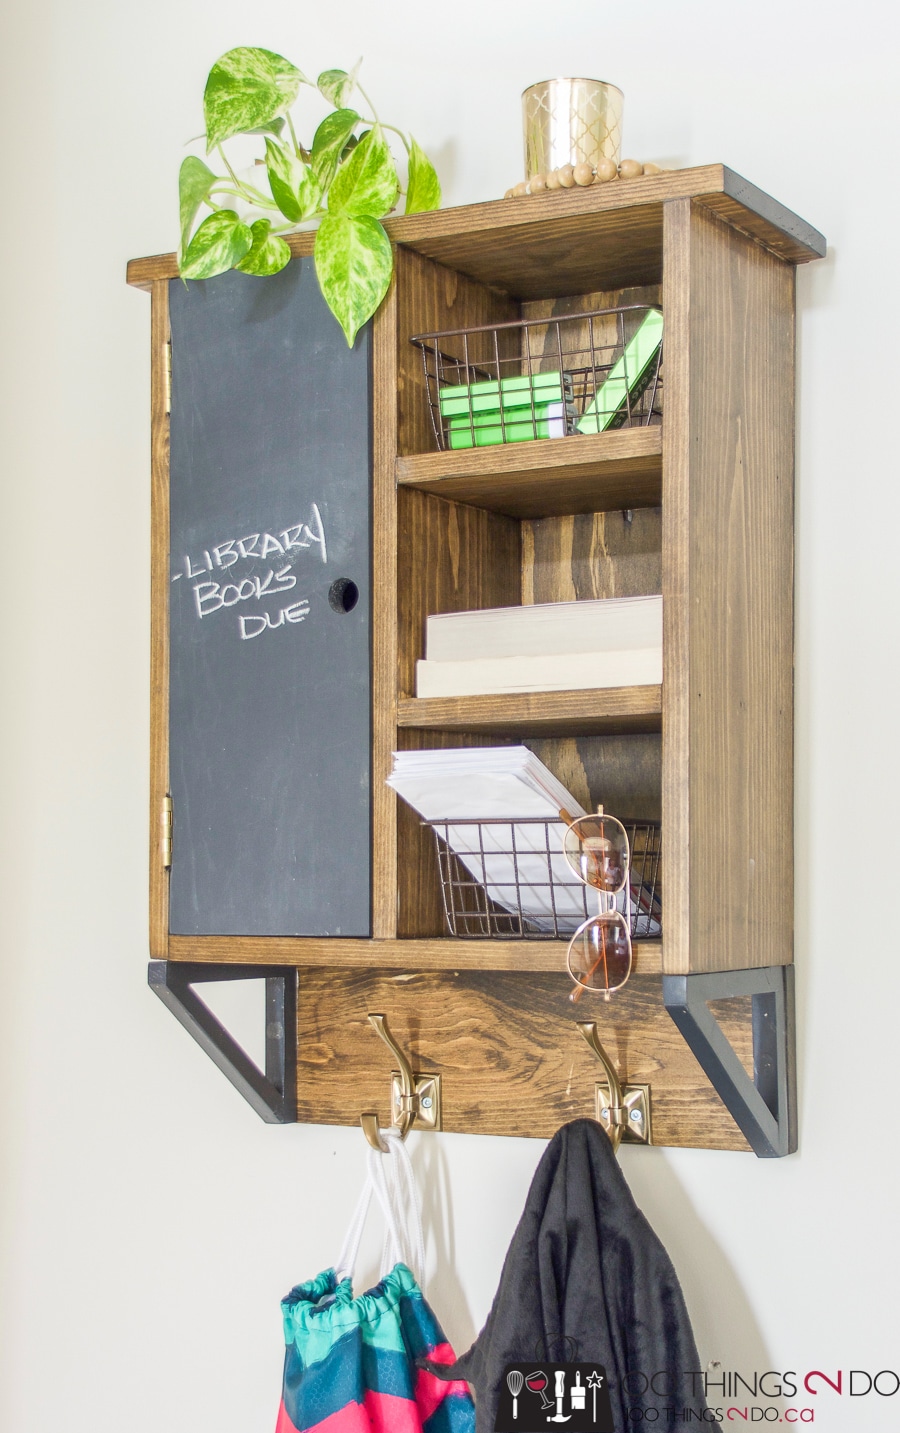 How to build a DIY wall organizer shelf with hooks and storage